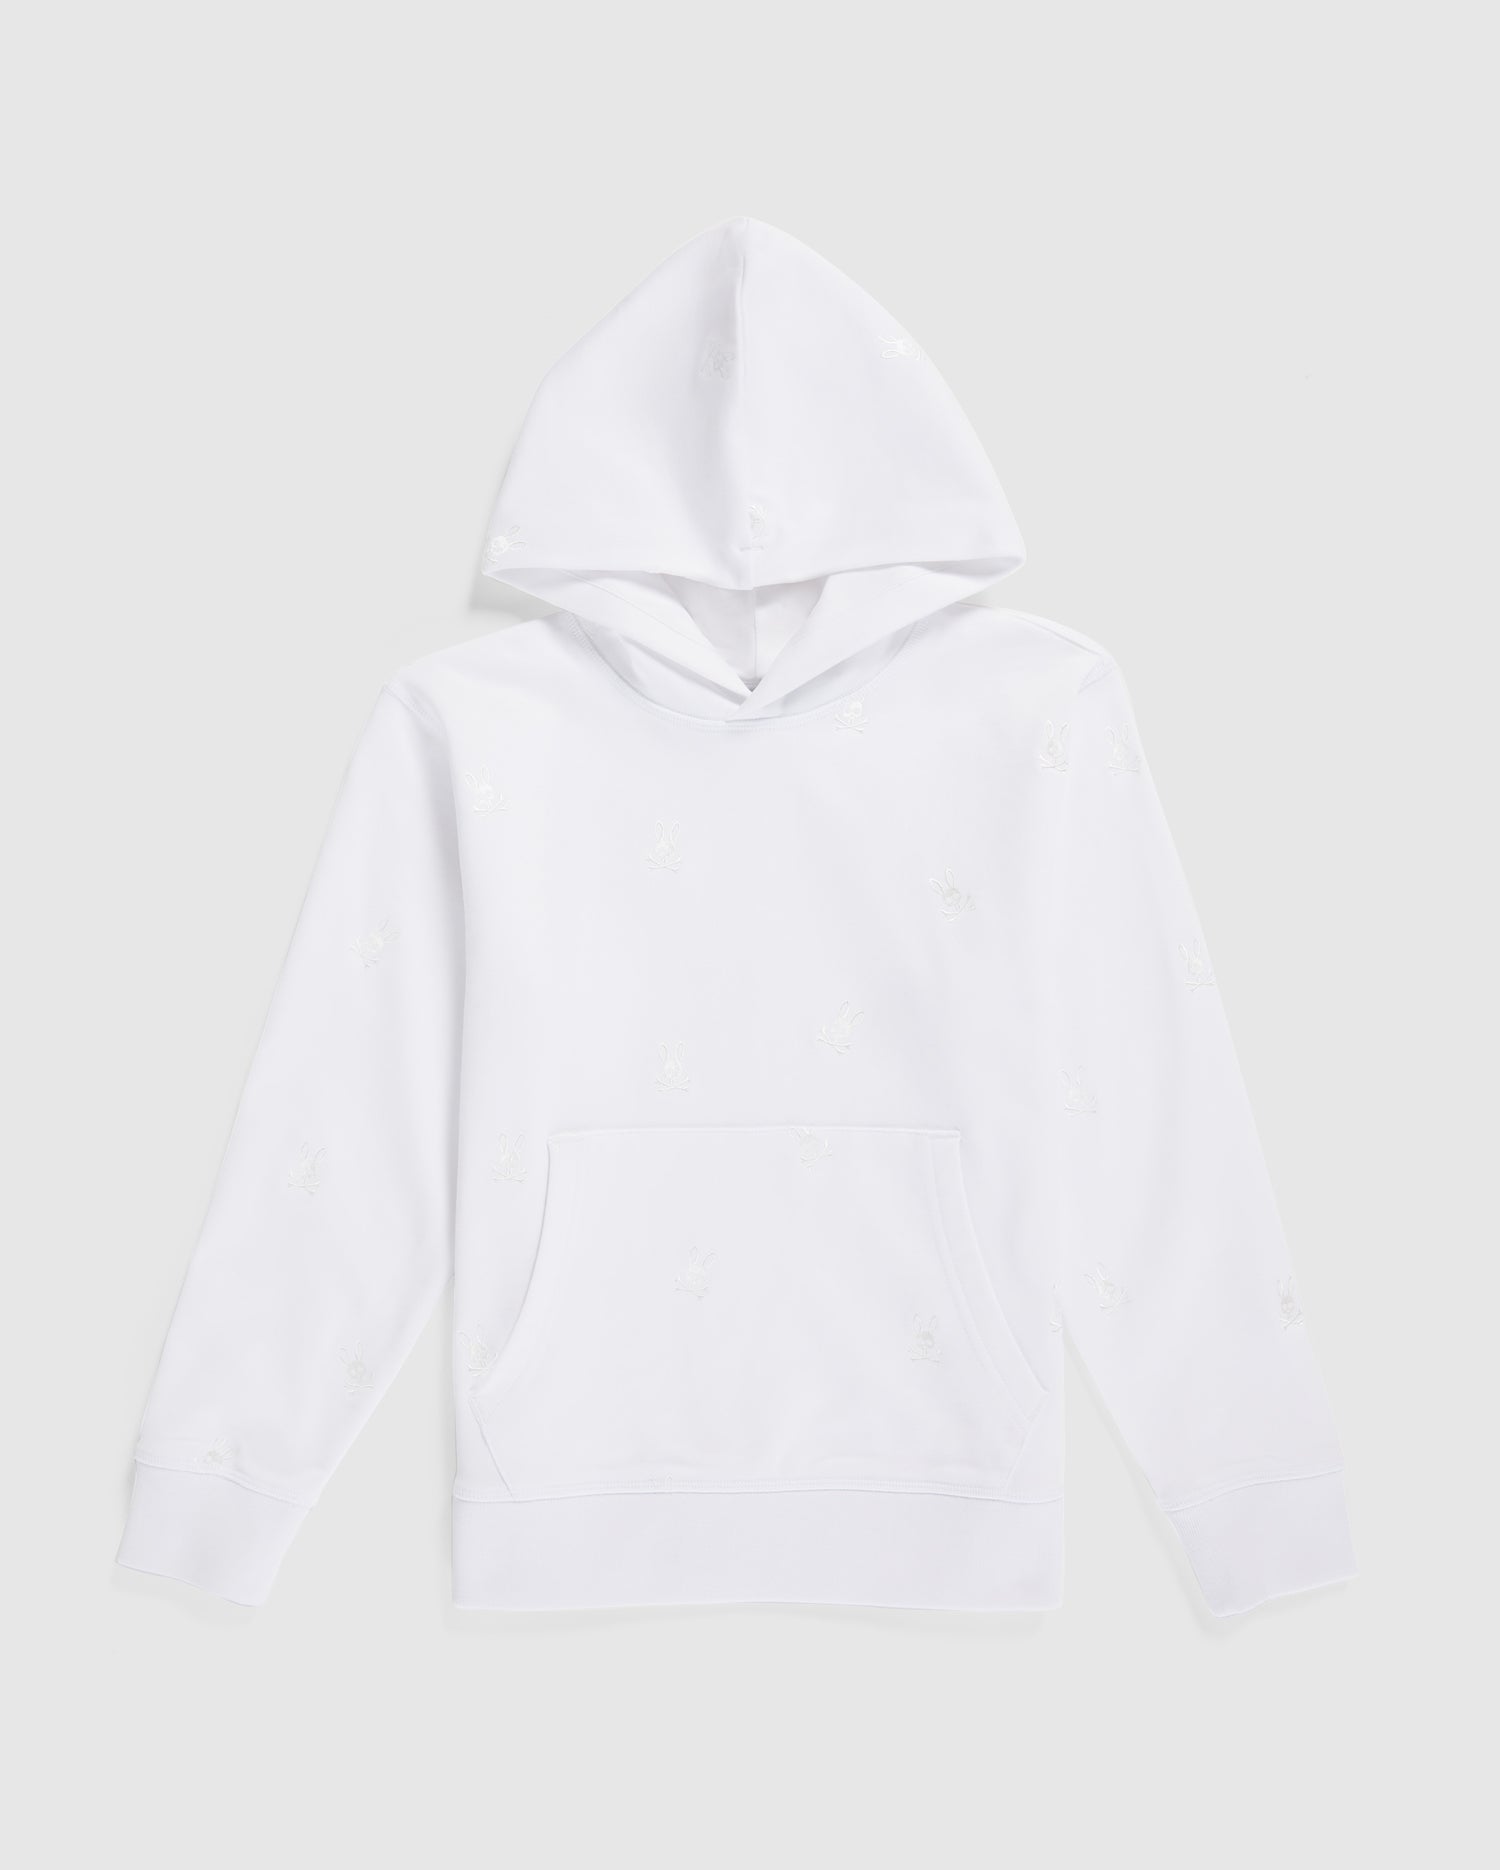 KIDS WHITE WOAD EMBROIDERED POPOVER HOODIE | PSYCHO BUNNY – Psycho Bunny